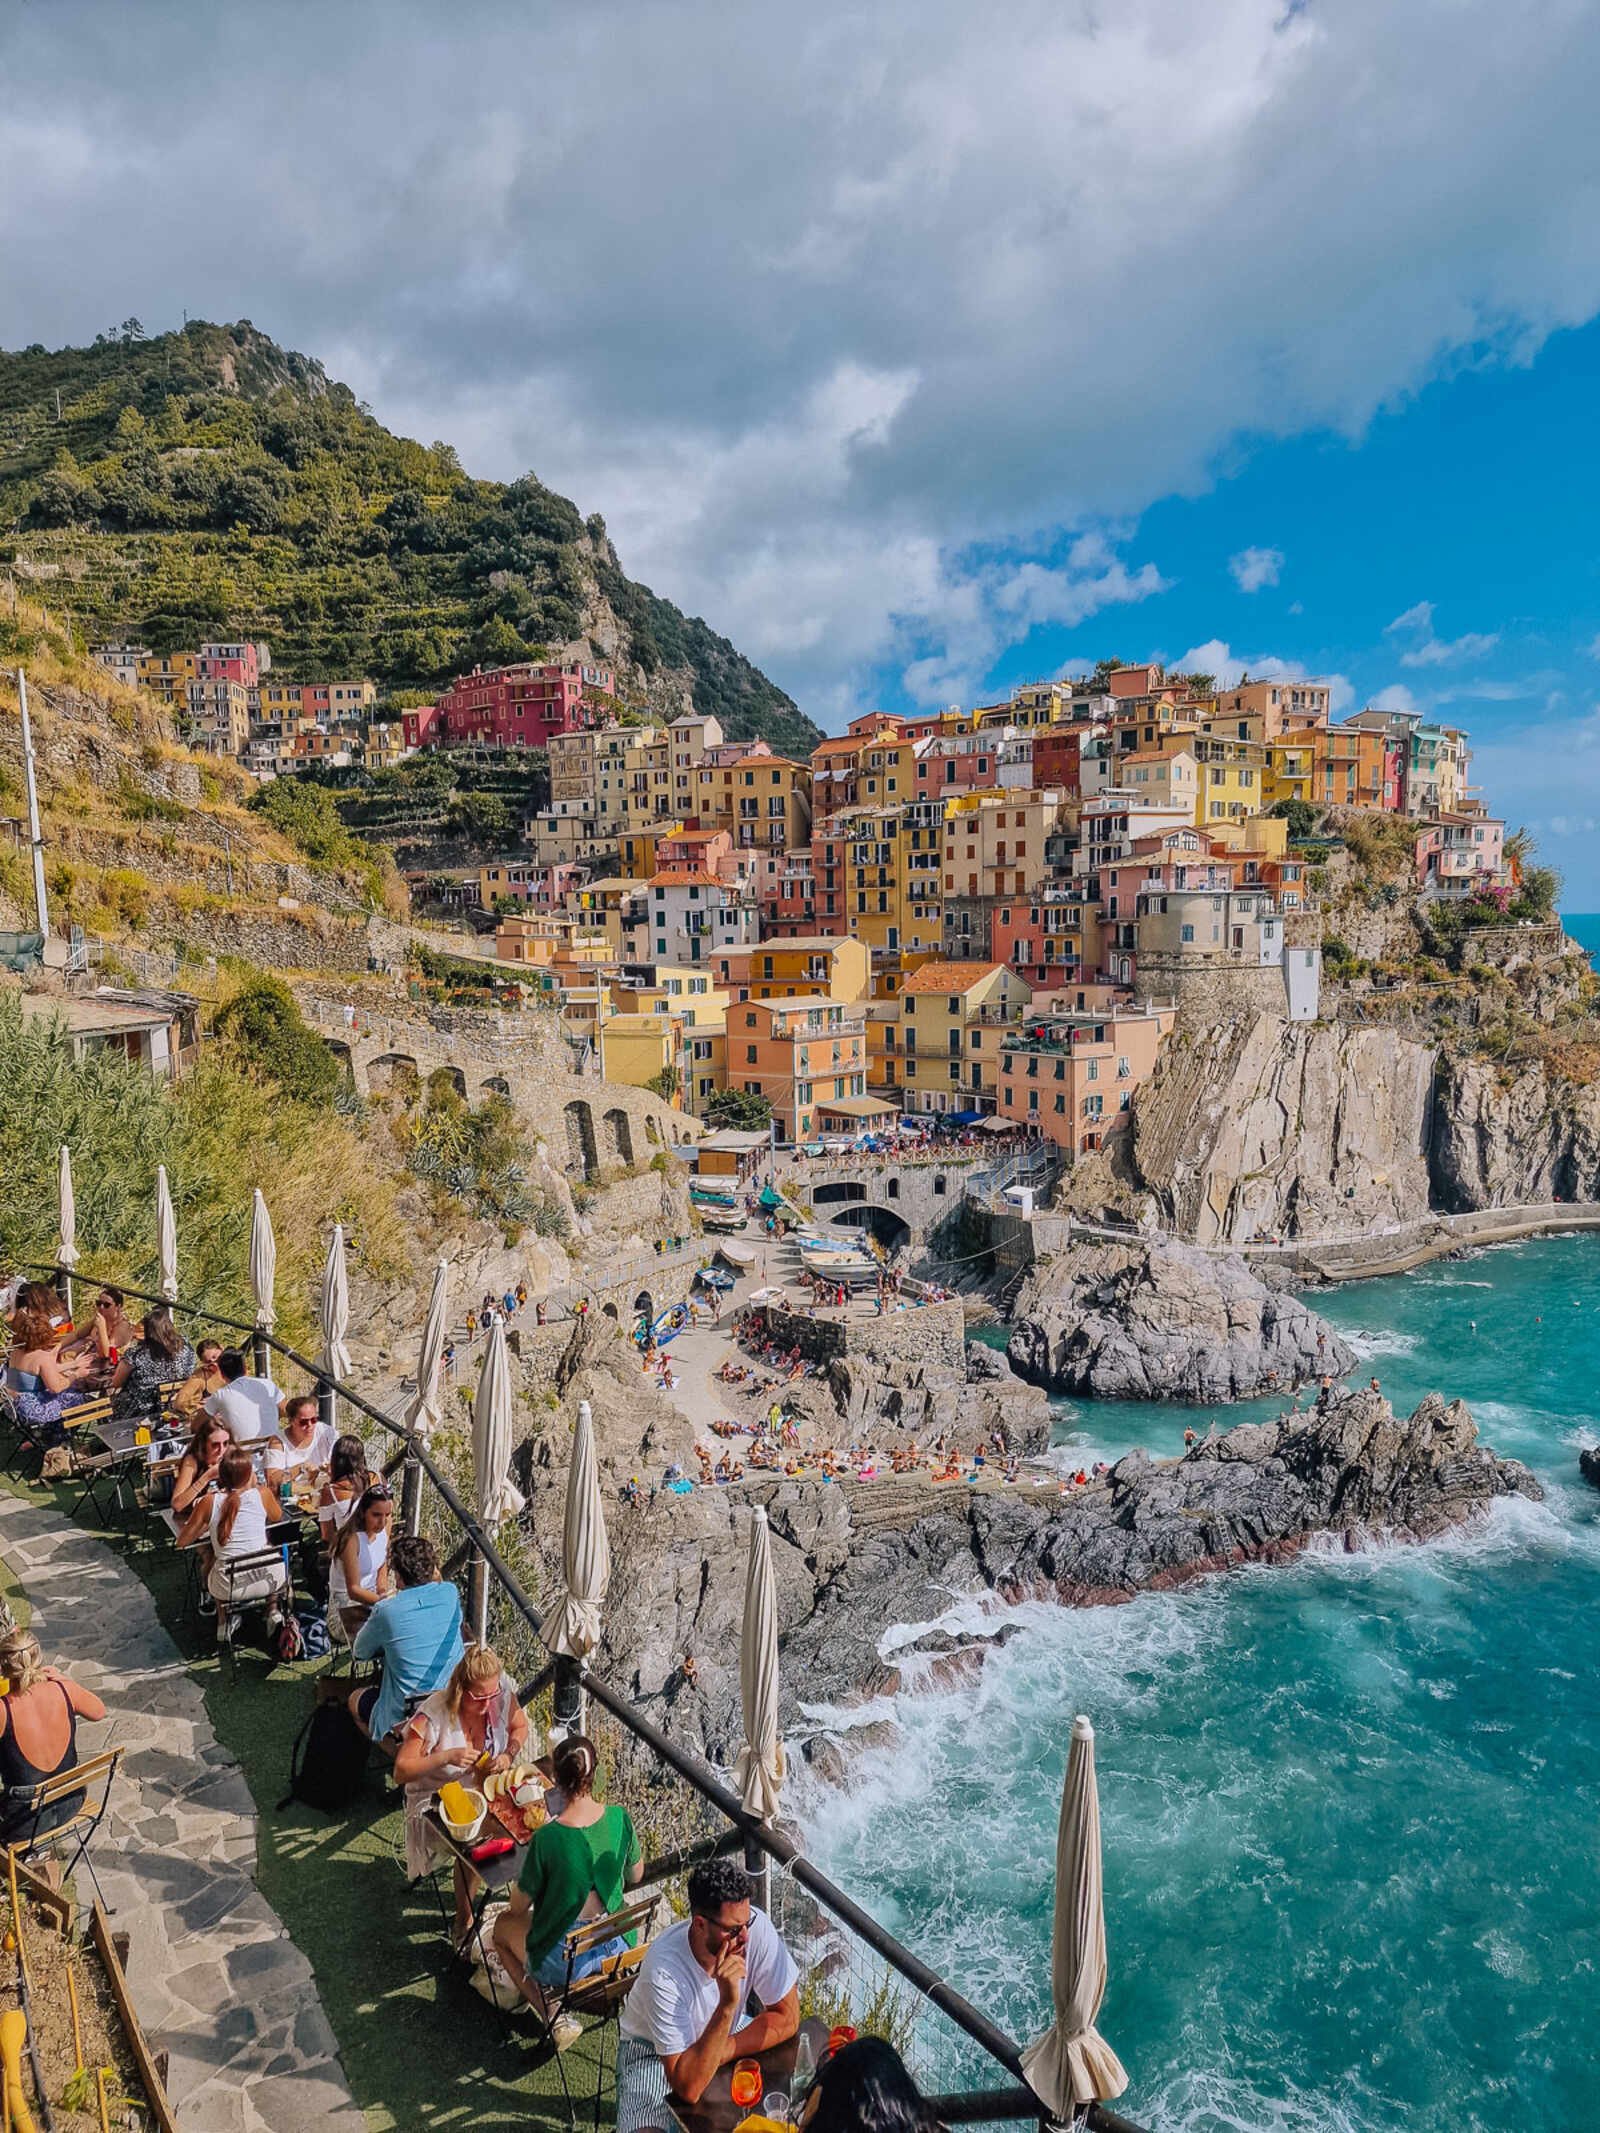 Looking down on the terrace at the famous restaurant in Manarola Cinque Terre with people sitting at lables and the view of the village behind them